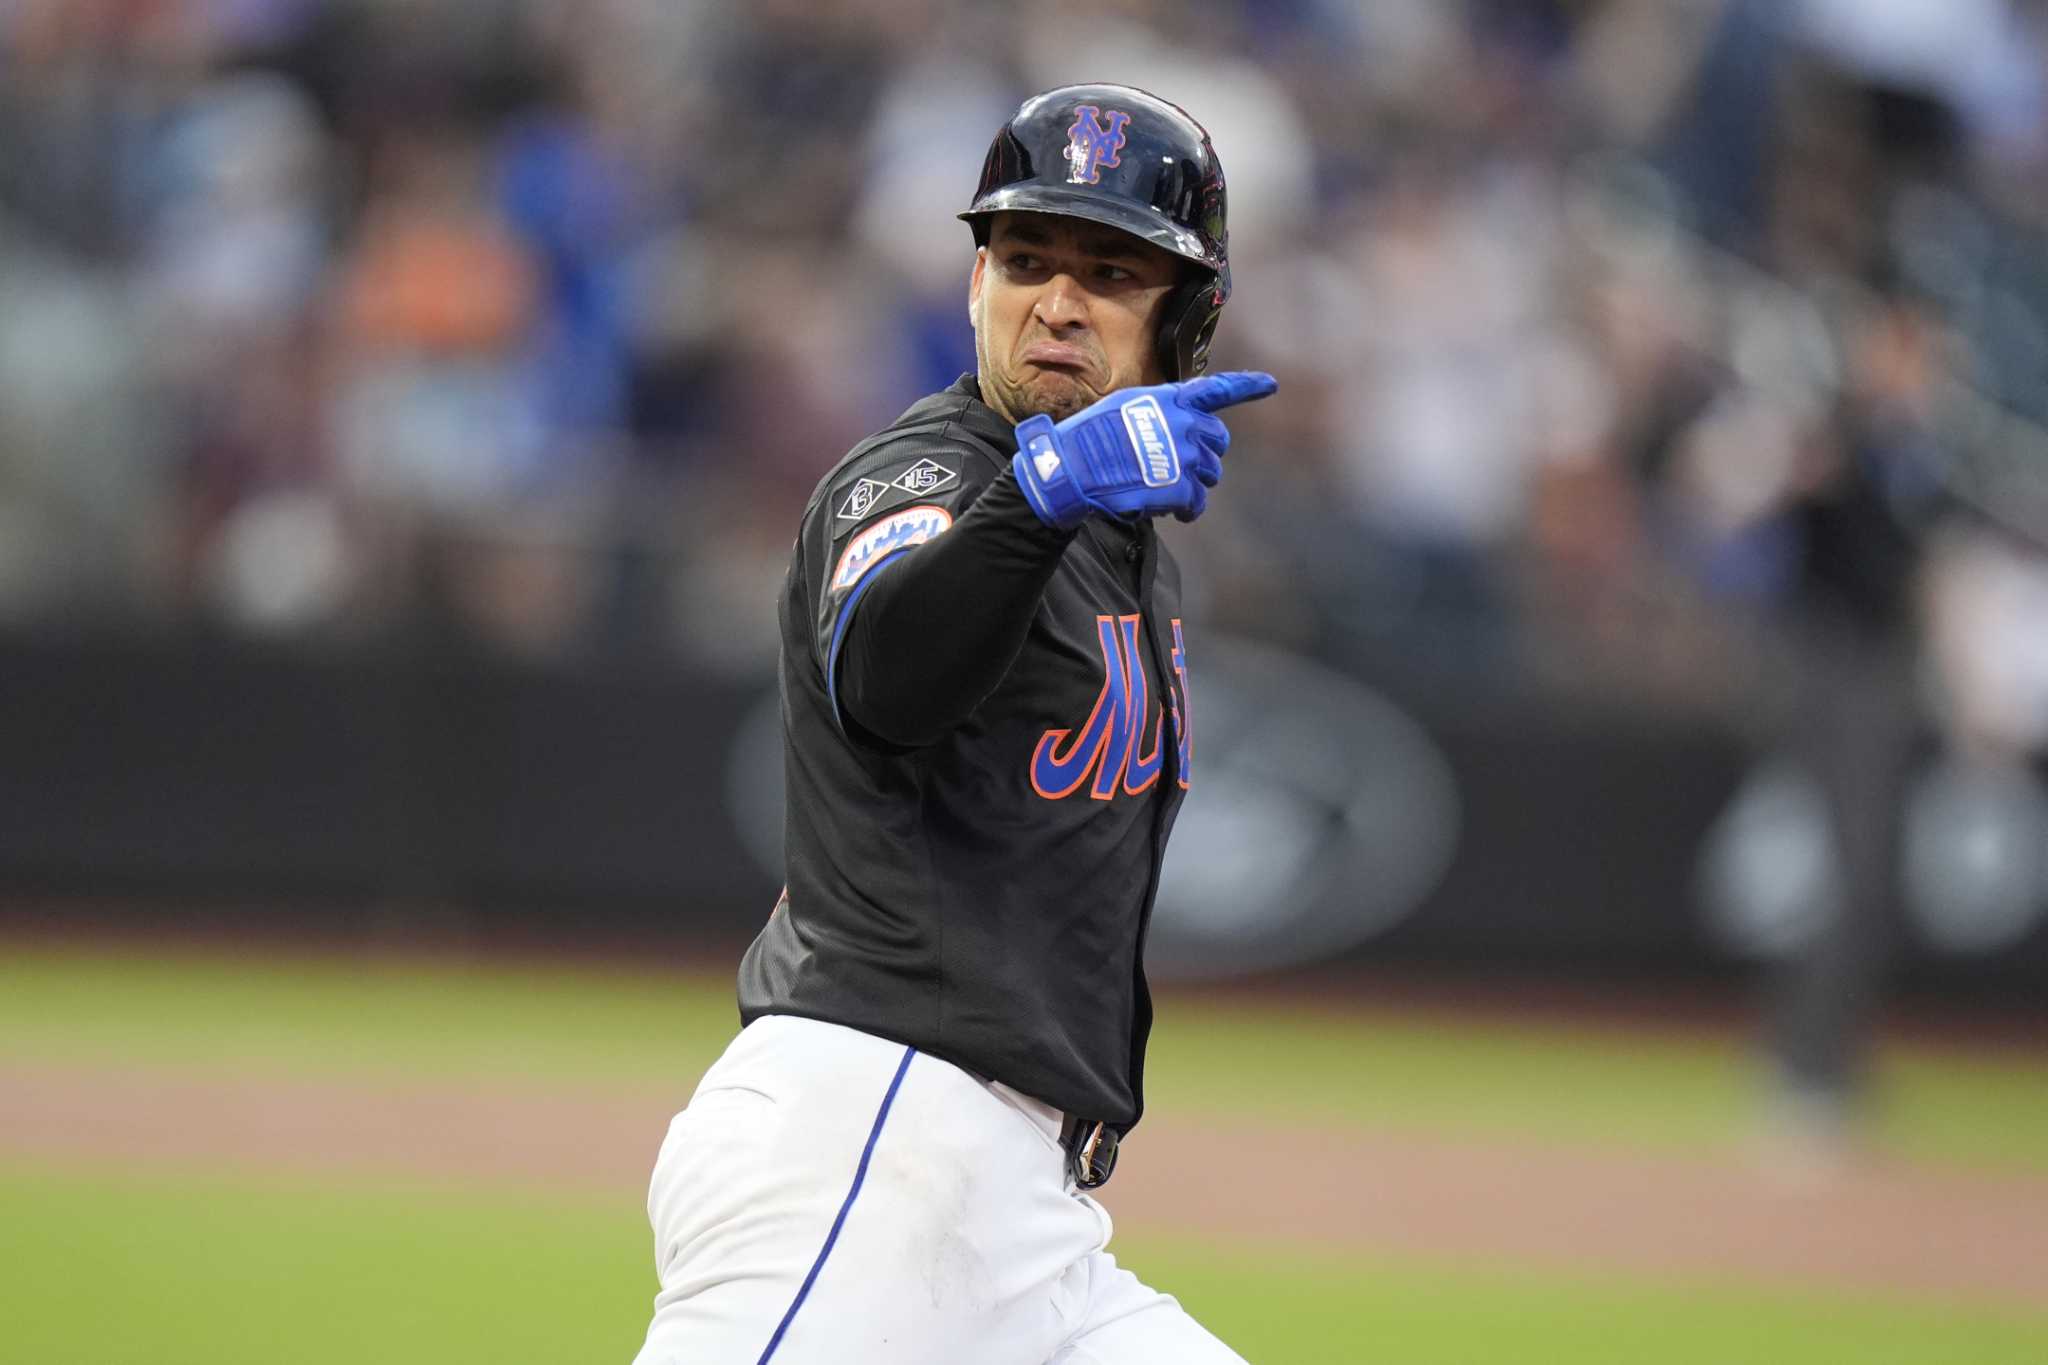 Iglesias and Bader both homer twice to help surging Mets hold off Rockies, 7-6